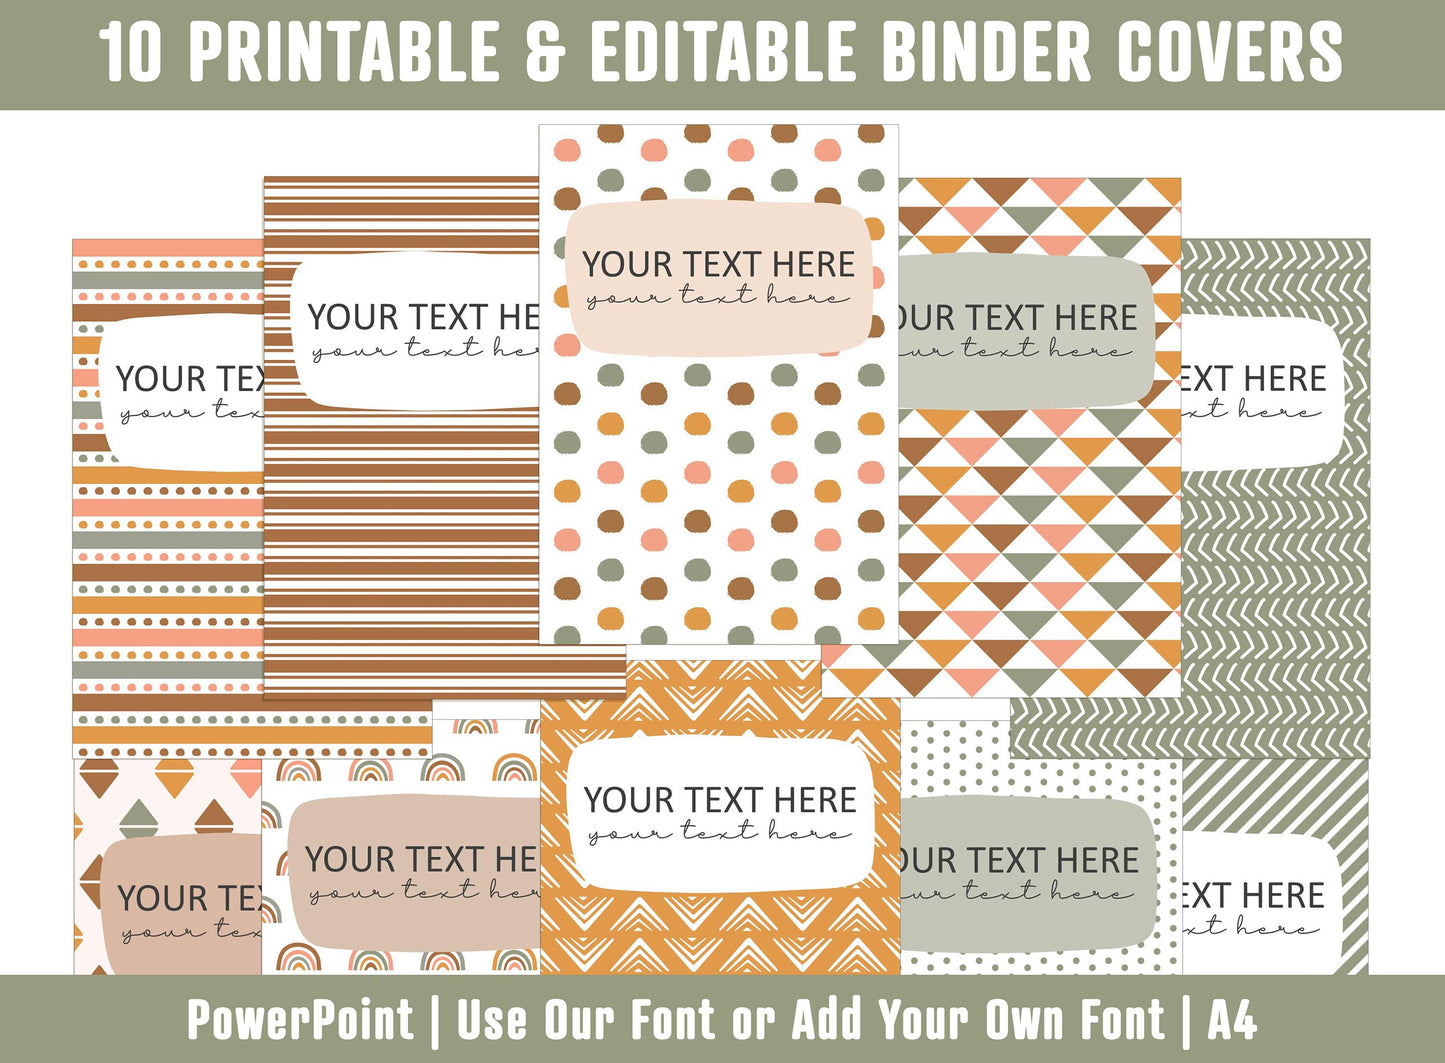 PowerPoint Binder Covers, 10 Printable/Editable Brown and Green Covers & Spines, Binder/Planner Inserts for Teacher, Student, Home School